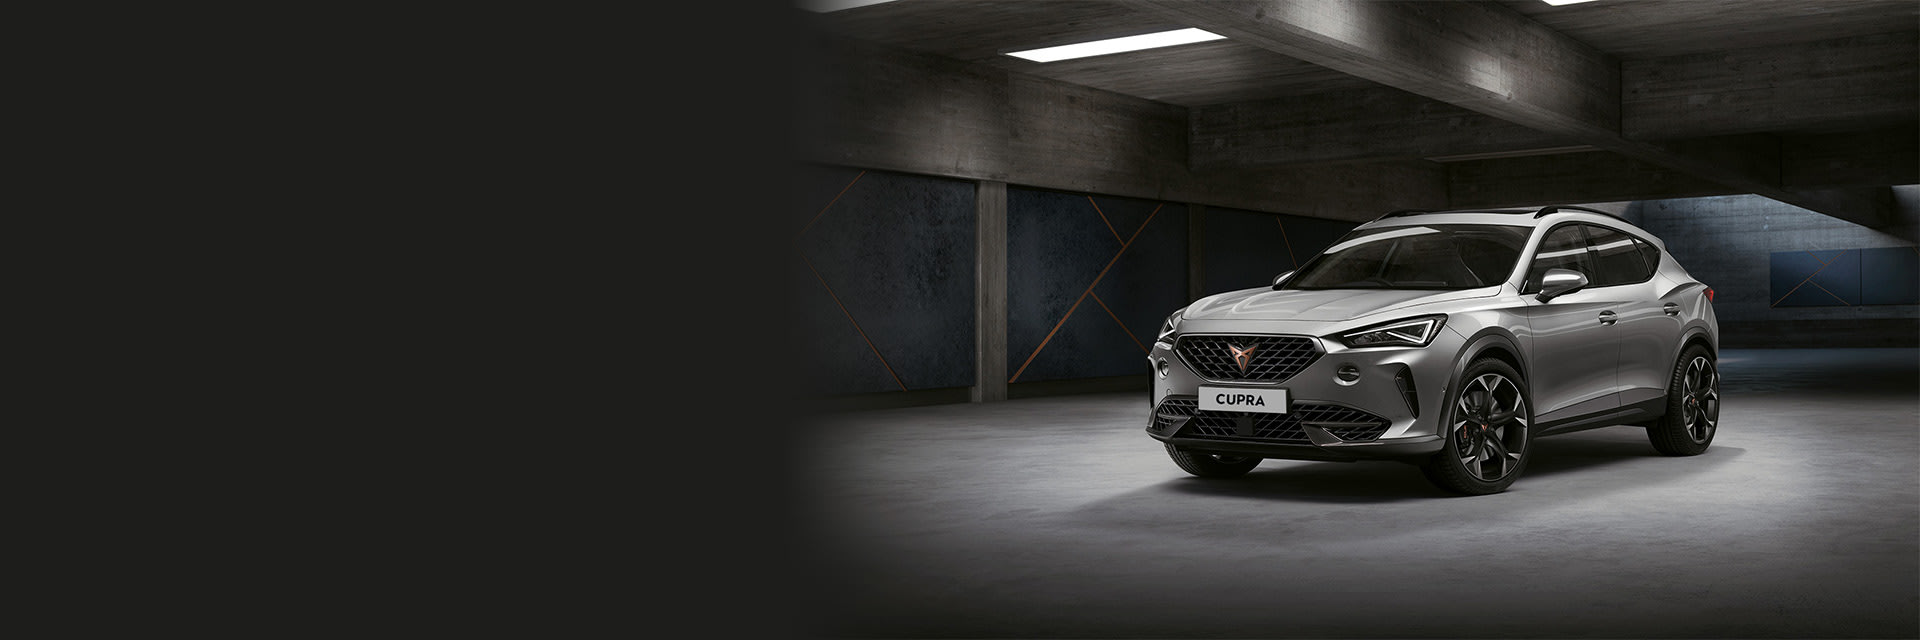 Lifestyle CUPRA Formentor front side view in spotlight image.